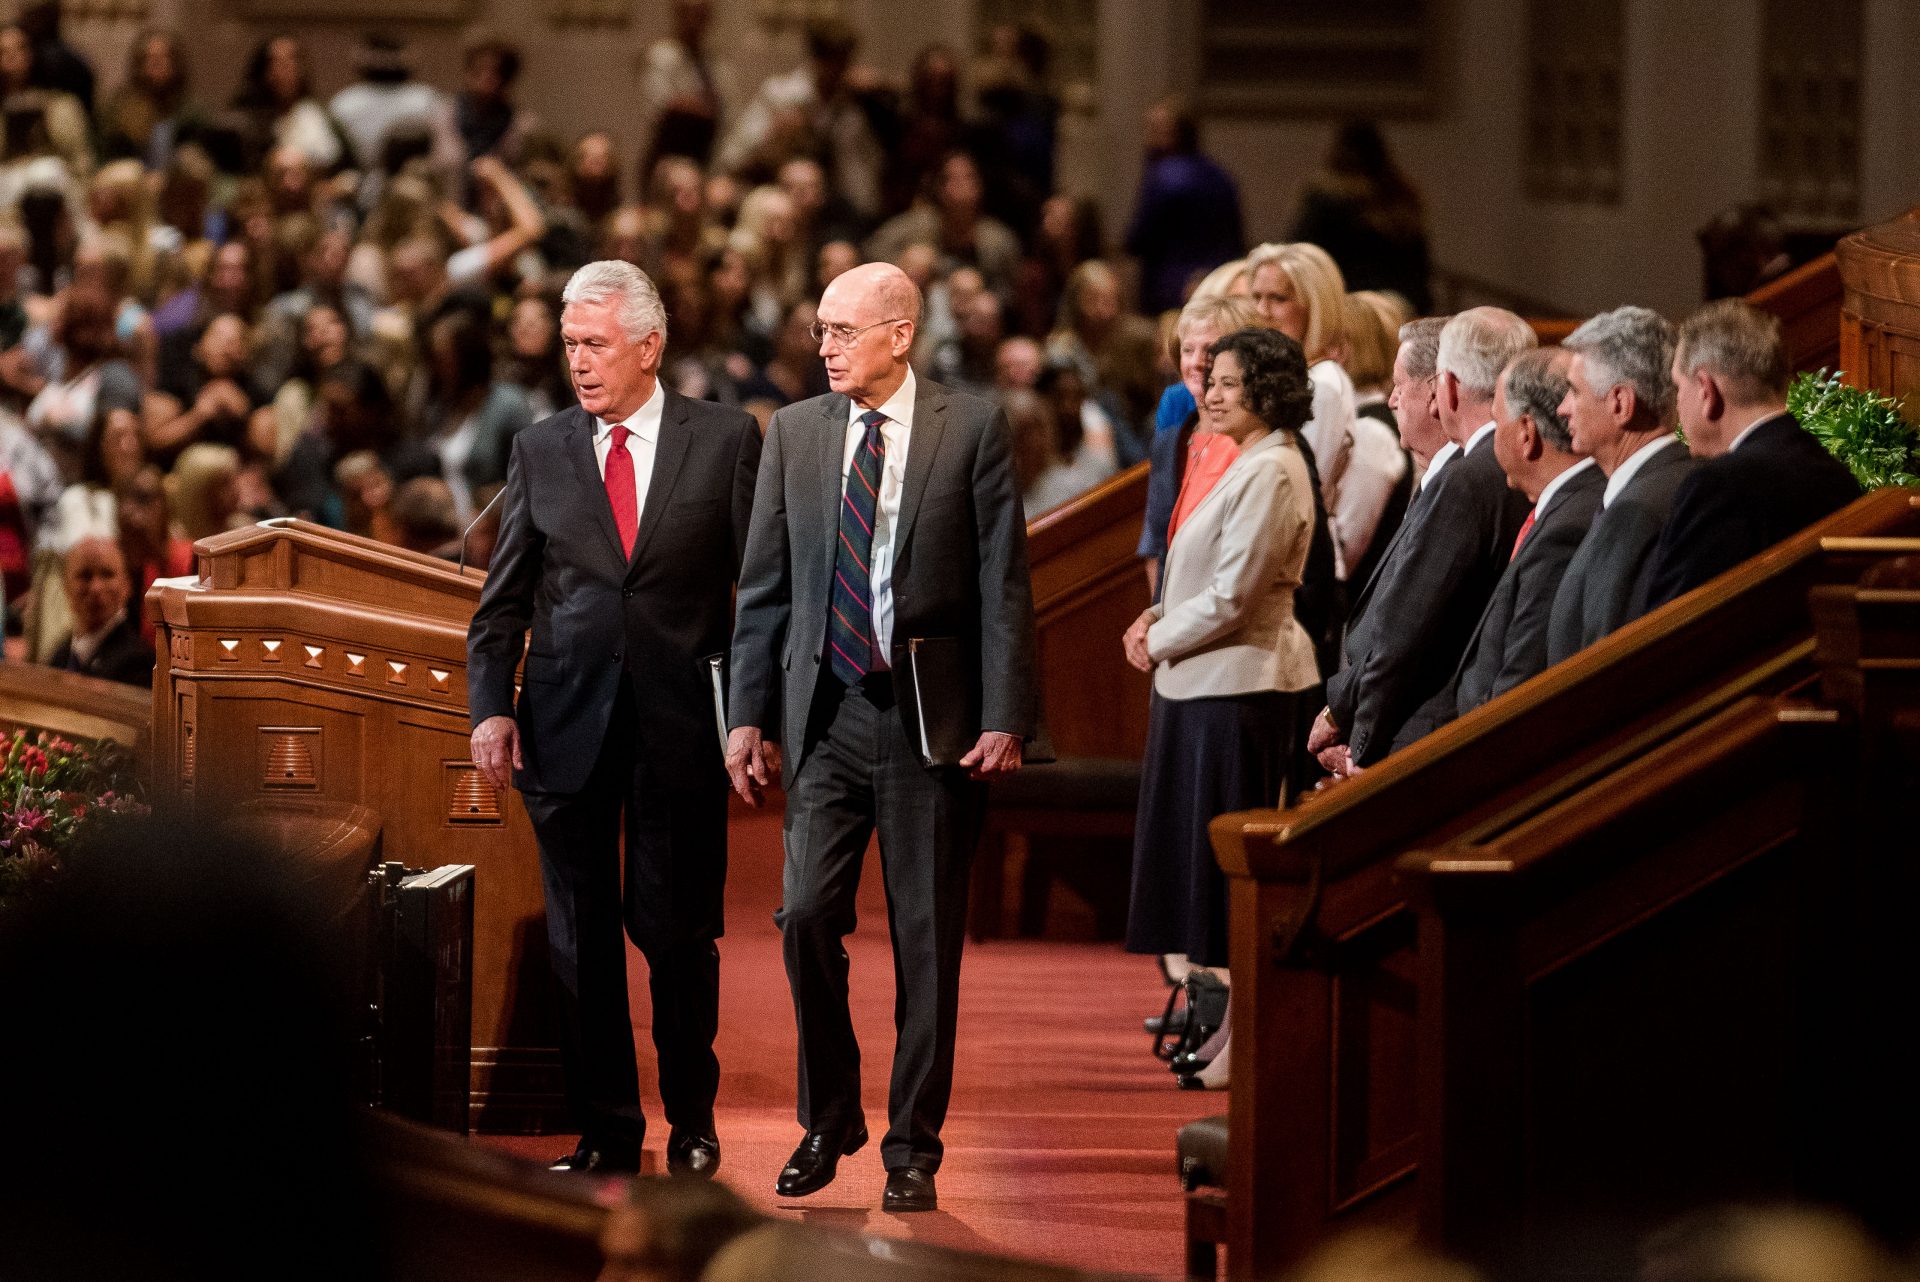 187th Semiannual General Conference encourages faith and following